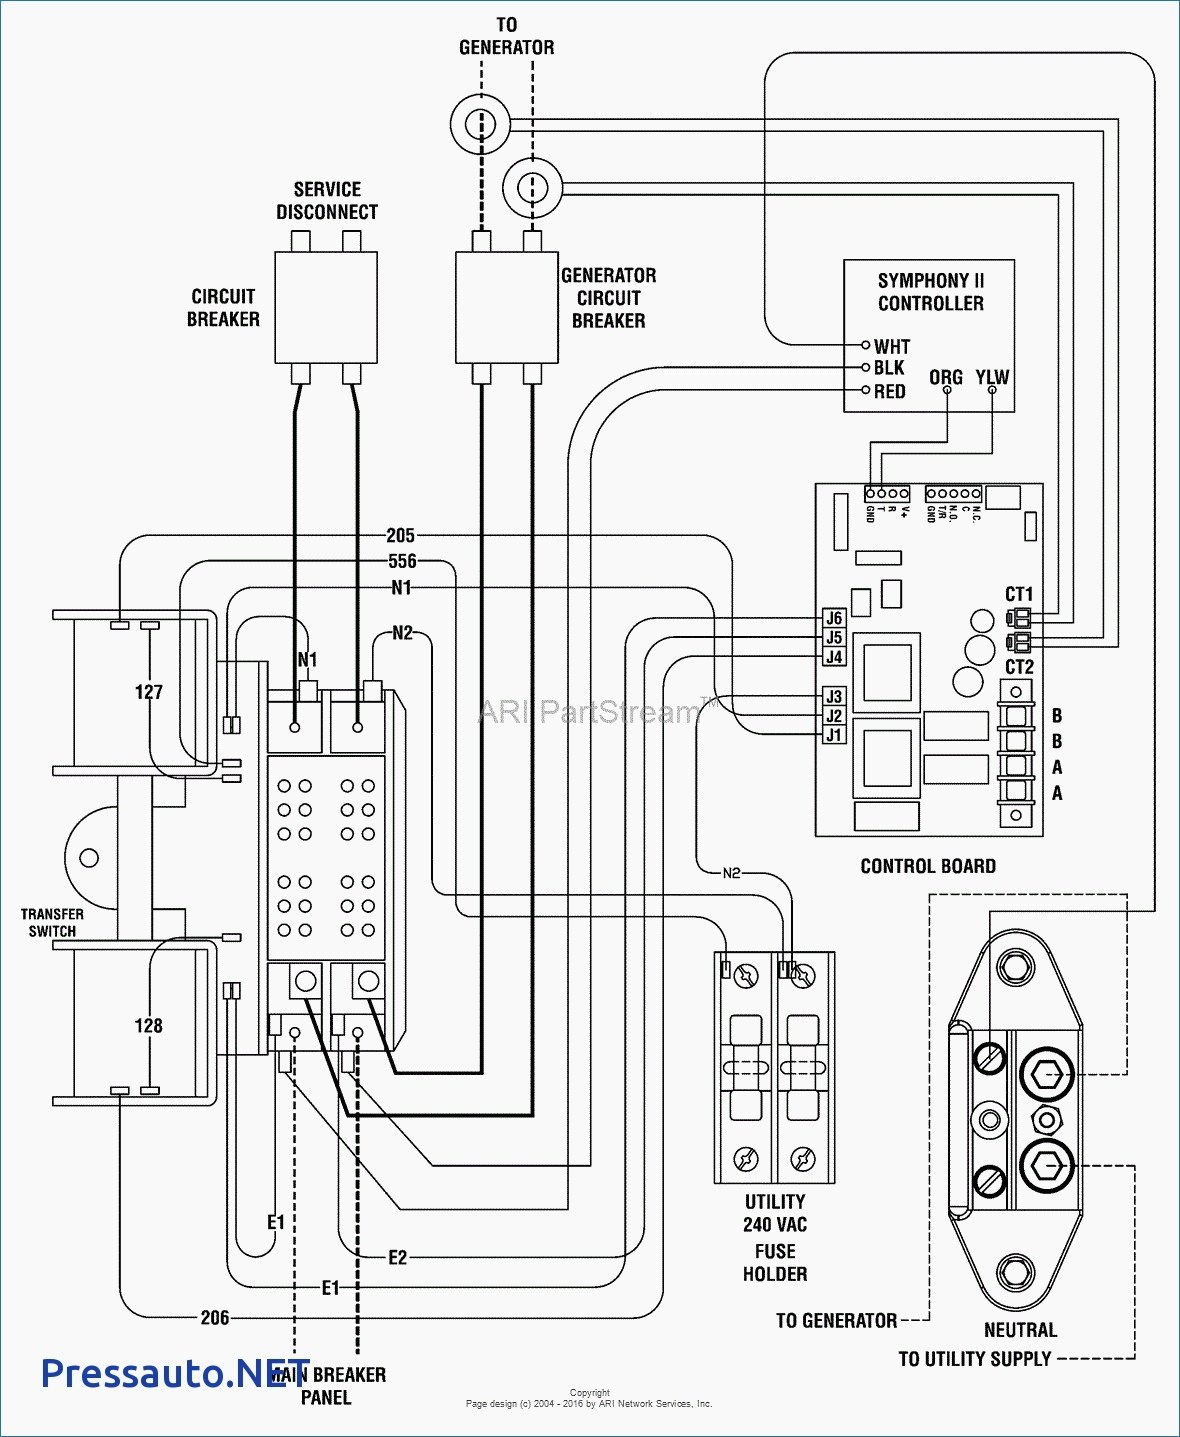 4969 Transfer Switch Wiring Diagram - Trusted Wiring Diagram Online - Manual Transfer Switch Wiring Diagram